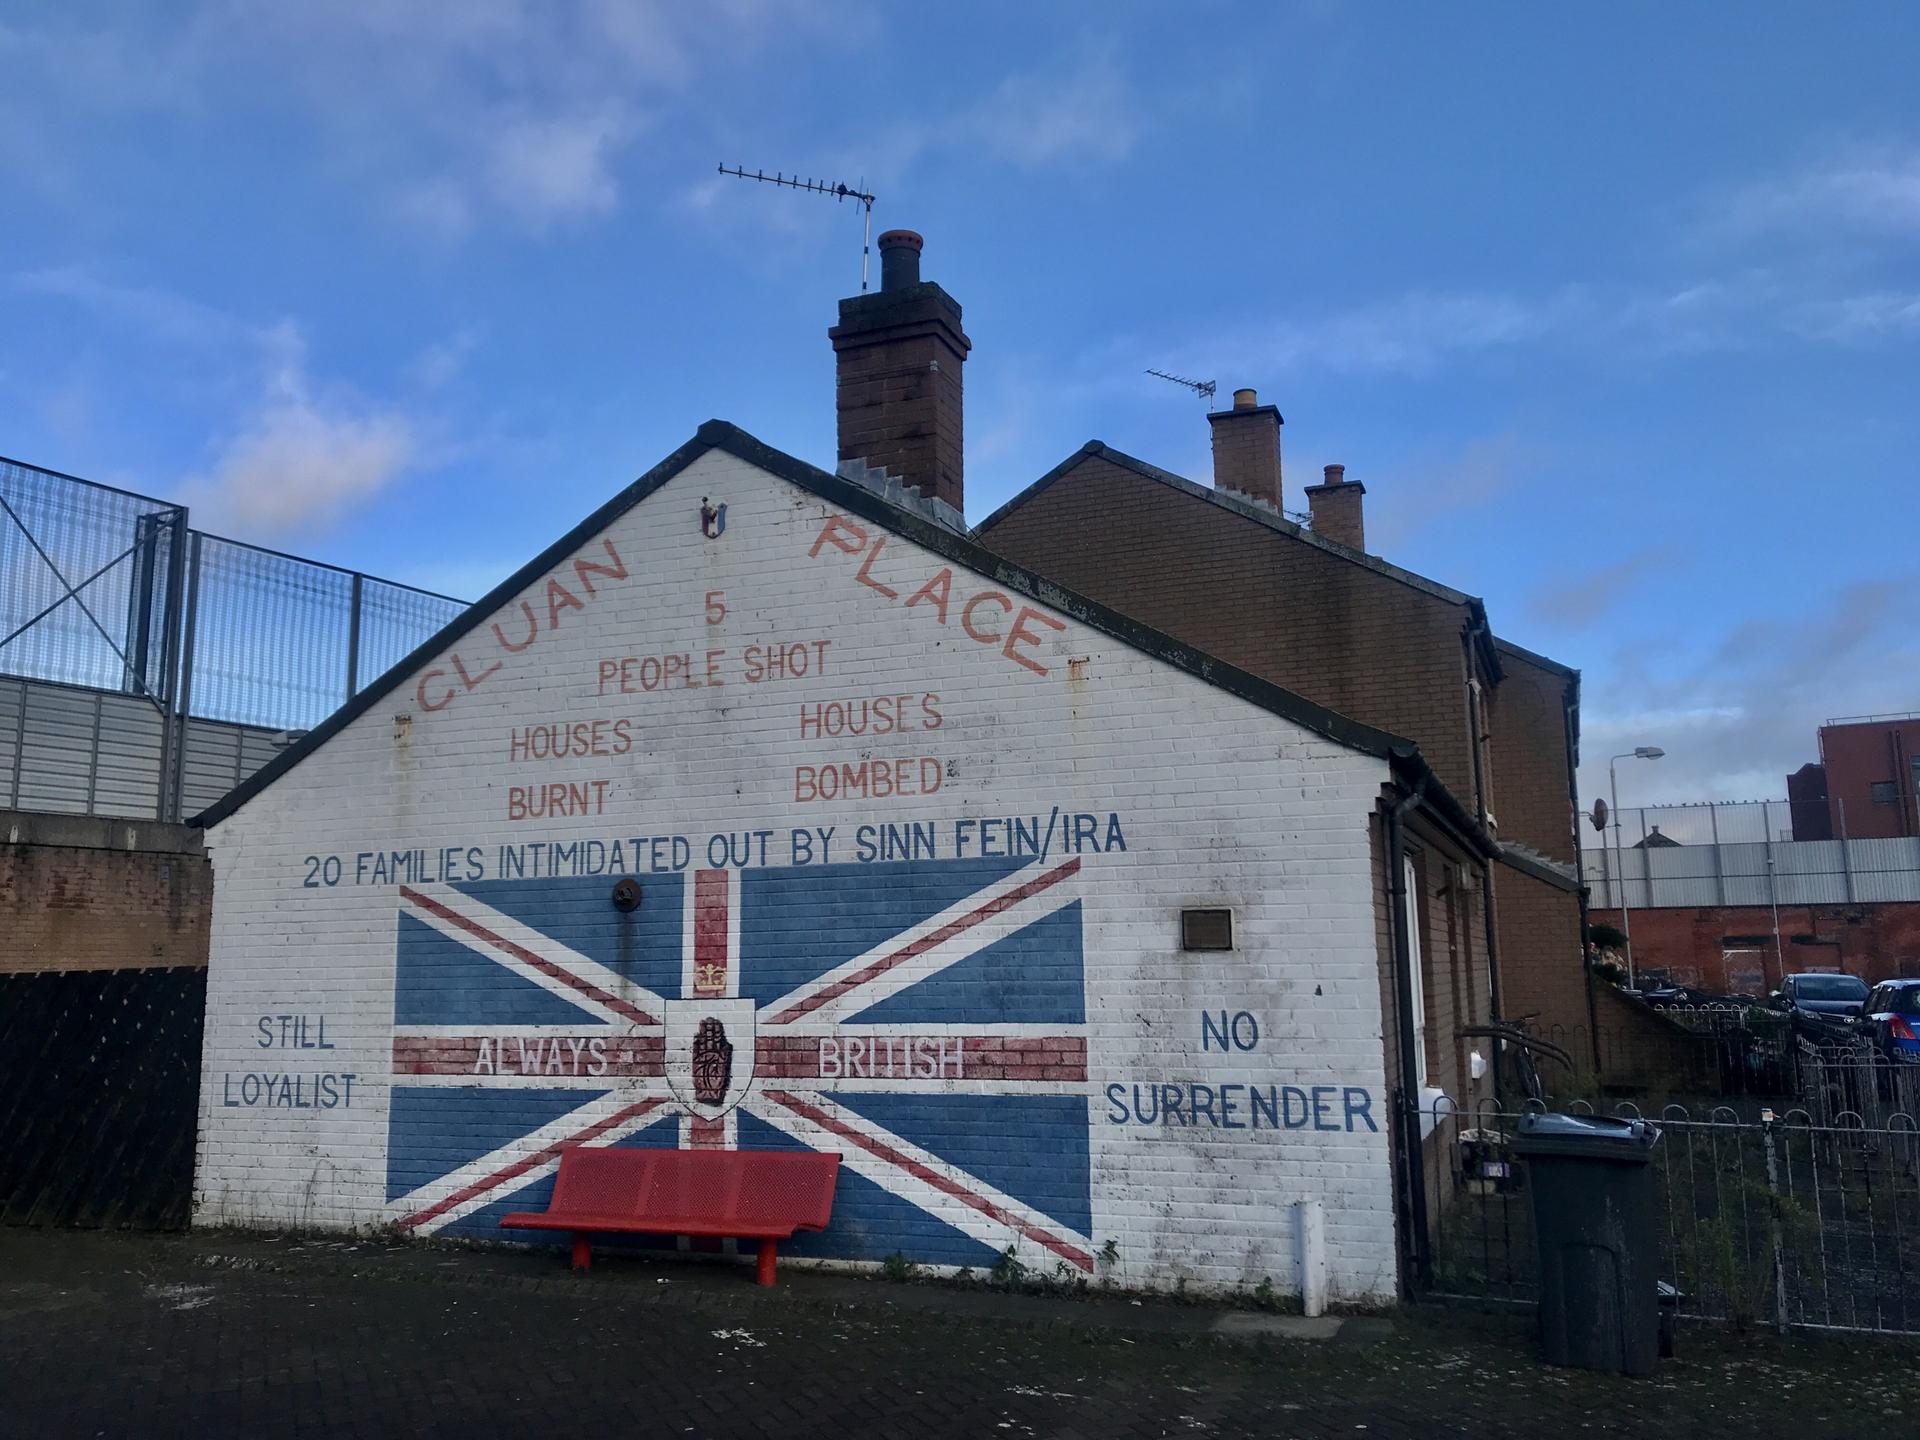 A side of a house is painting with British loyalist colors and message. 